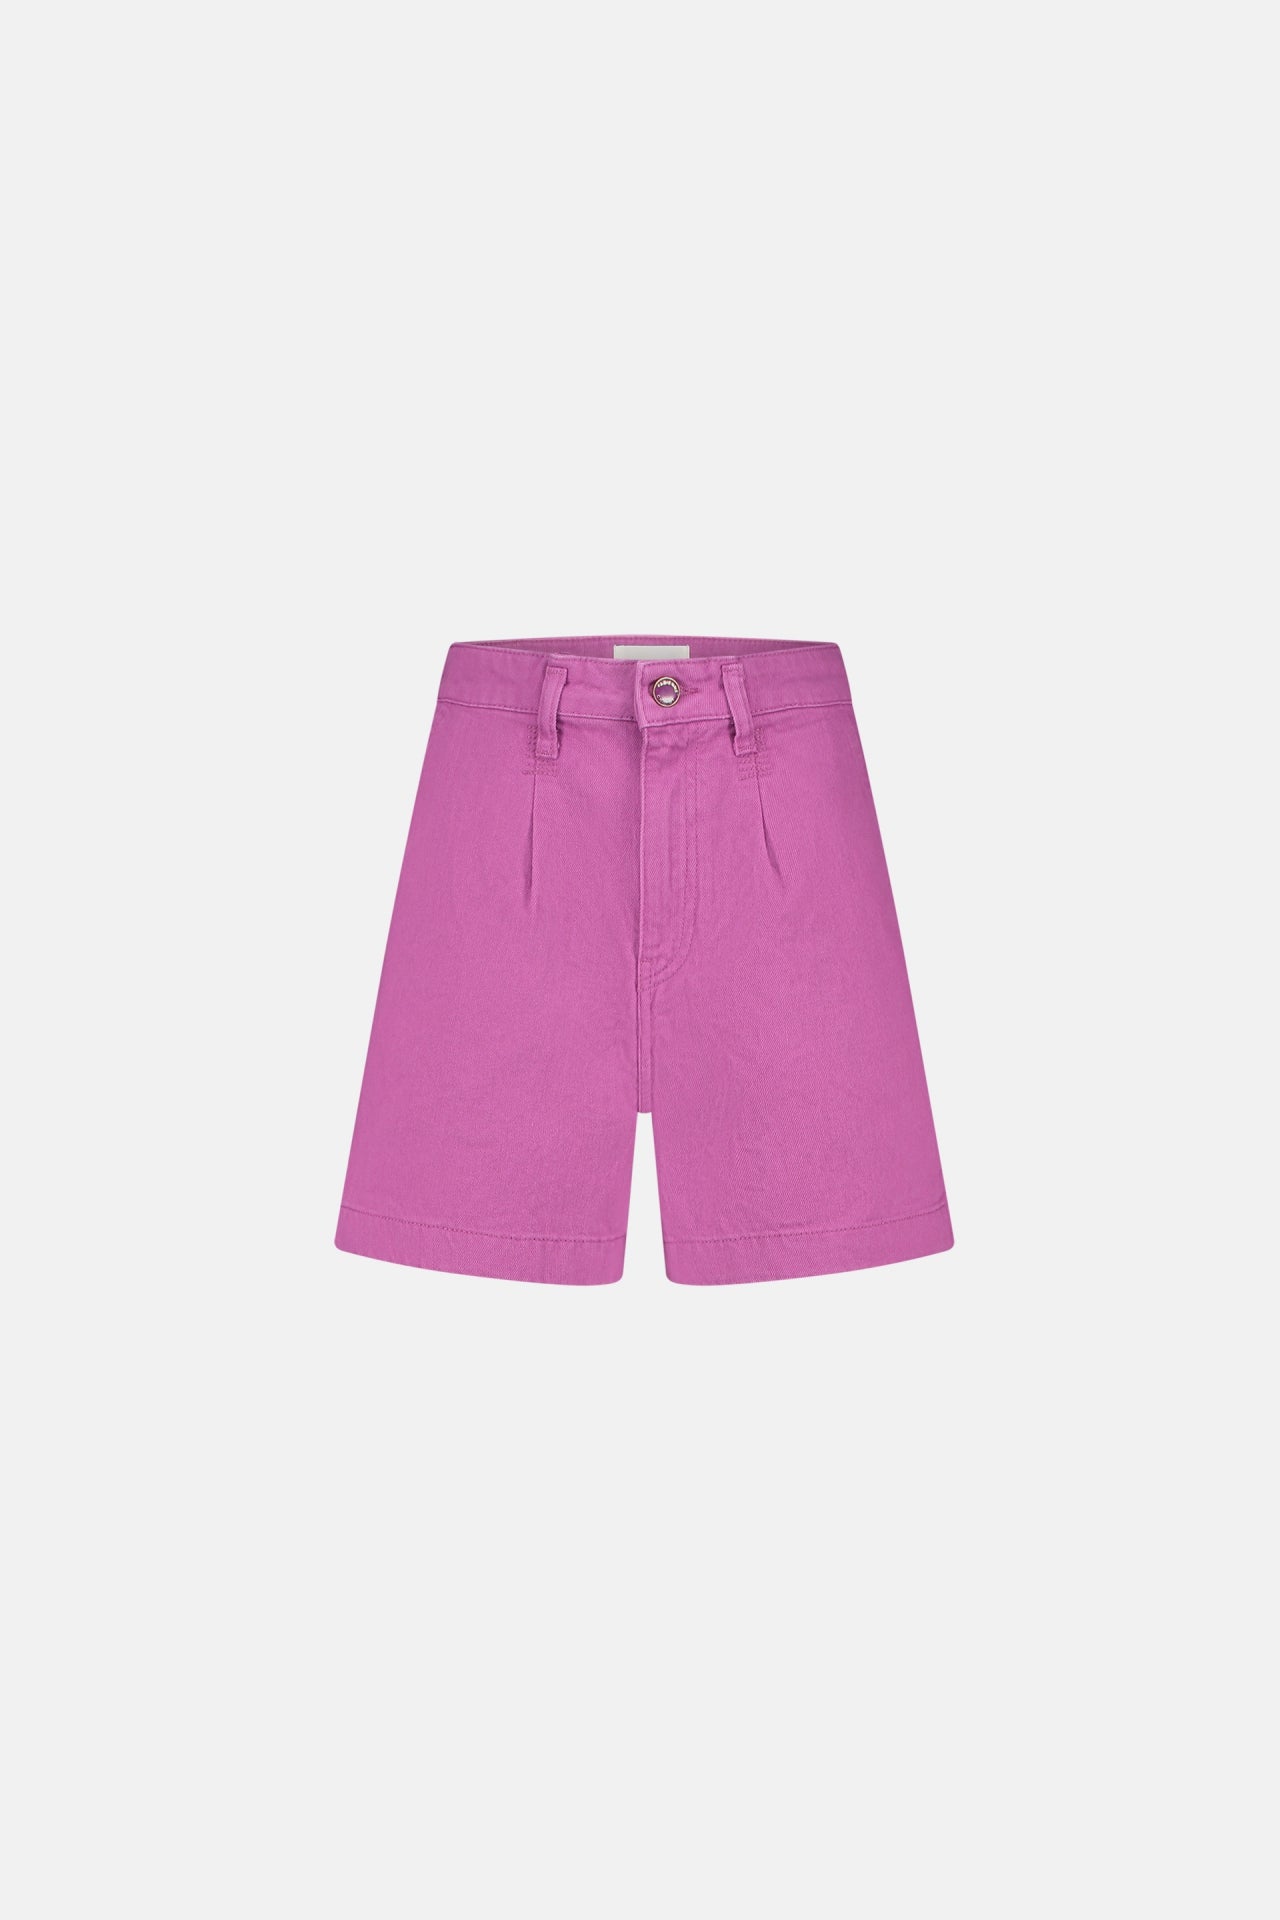 Foster Shorts | Cassis